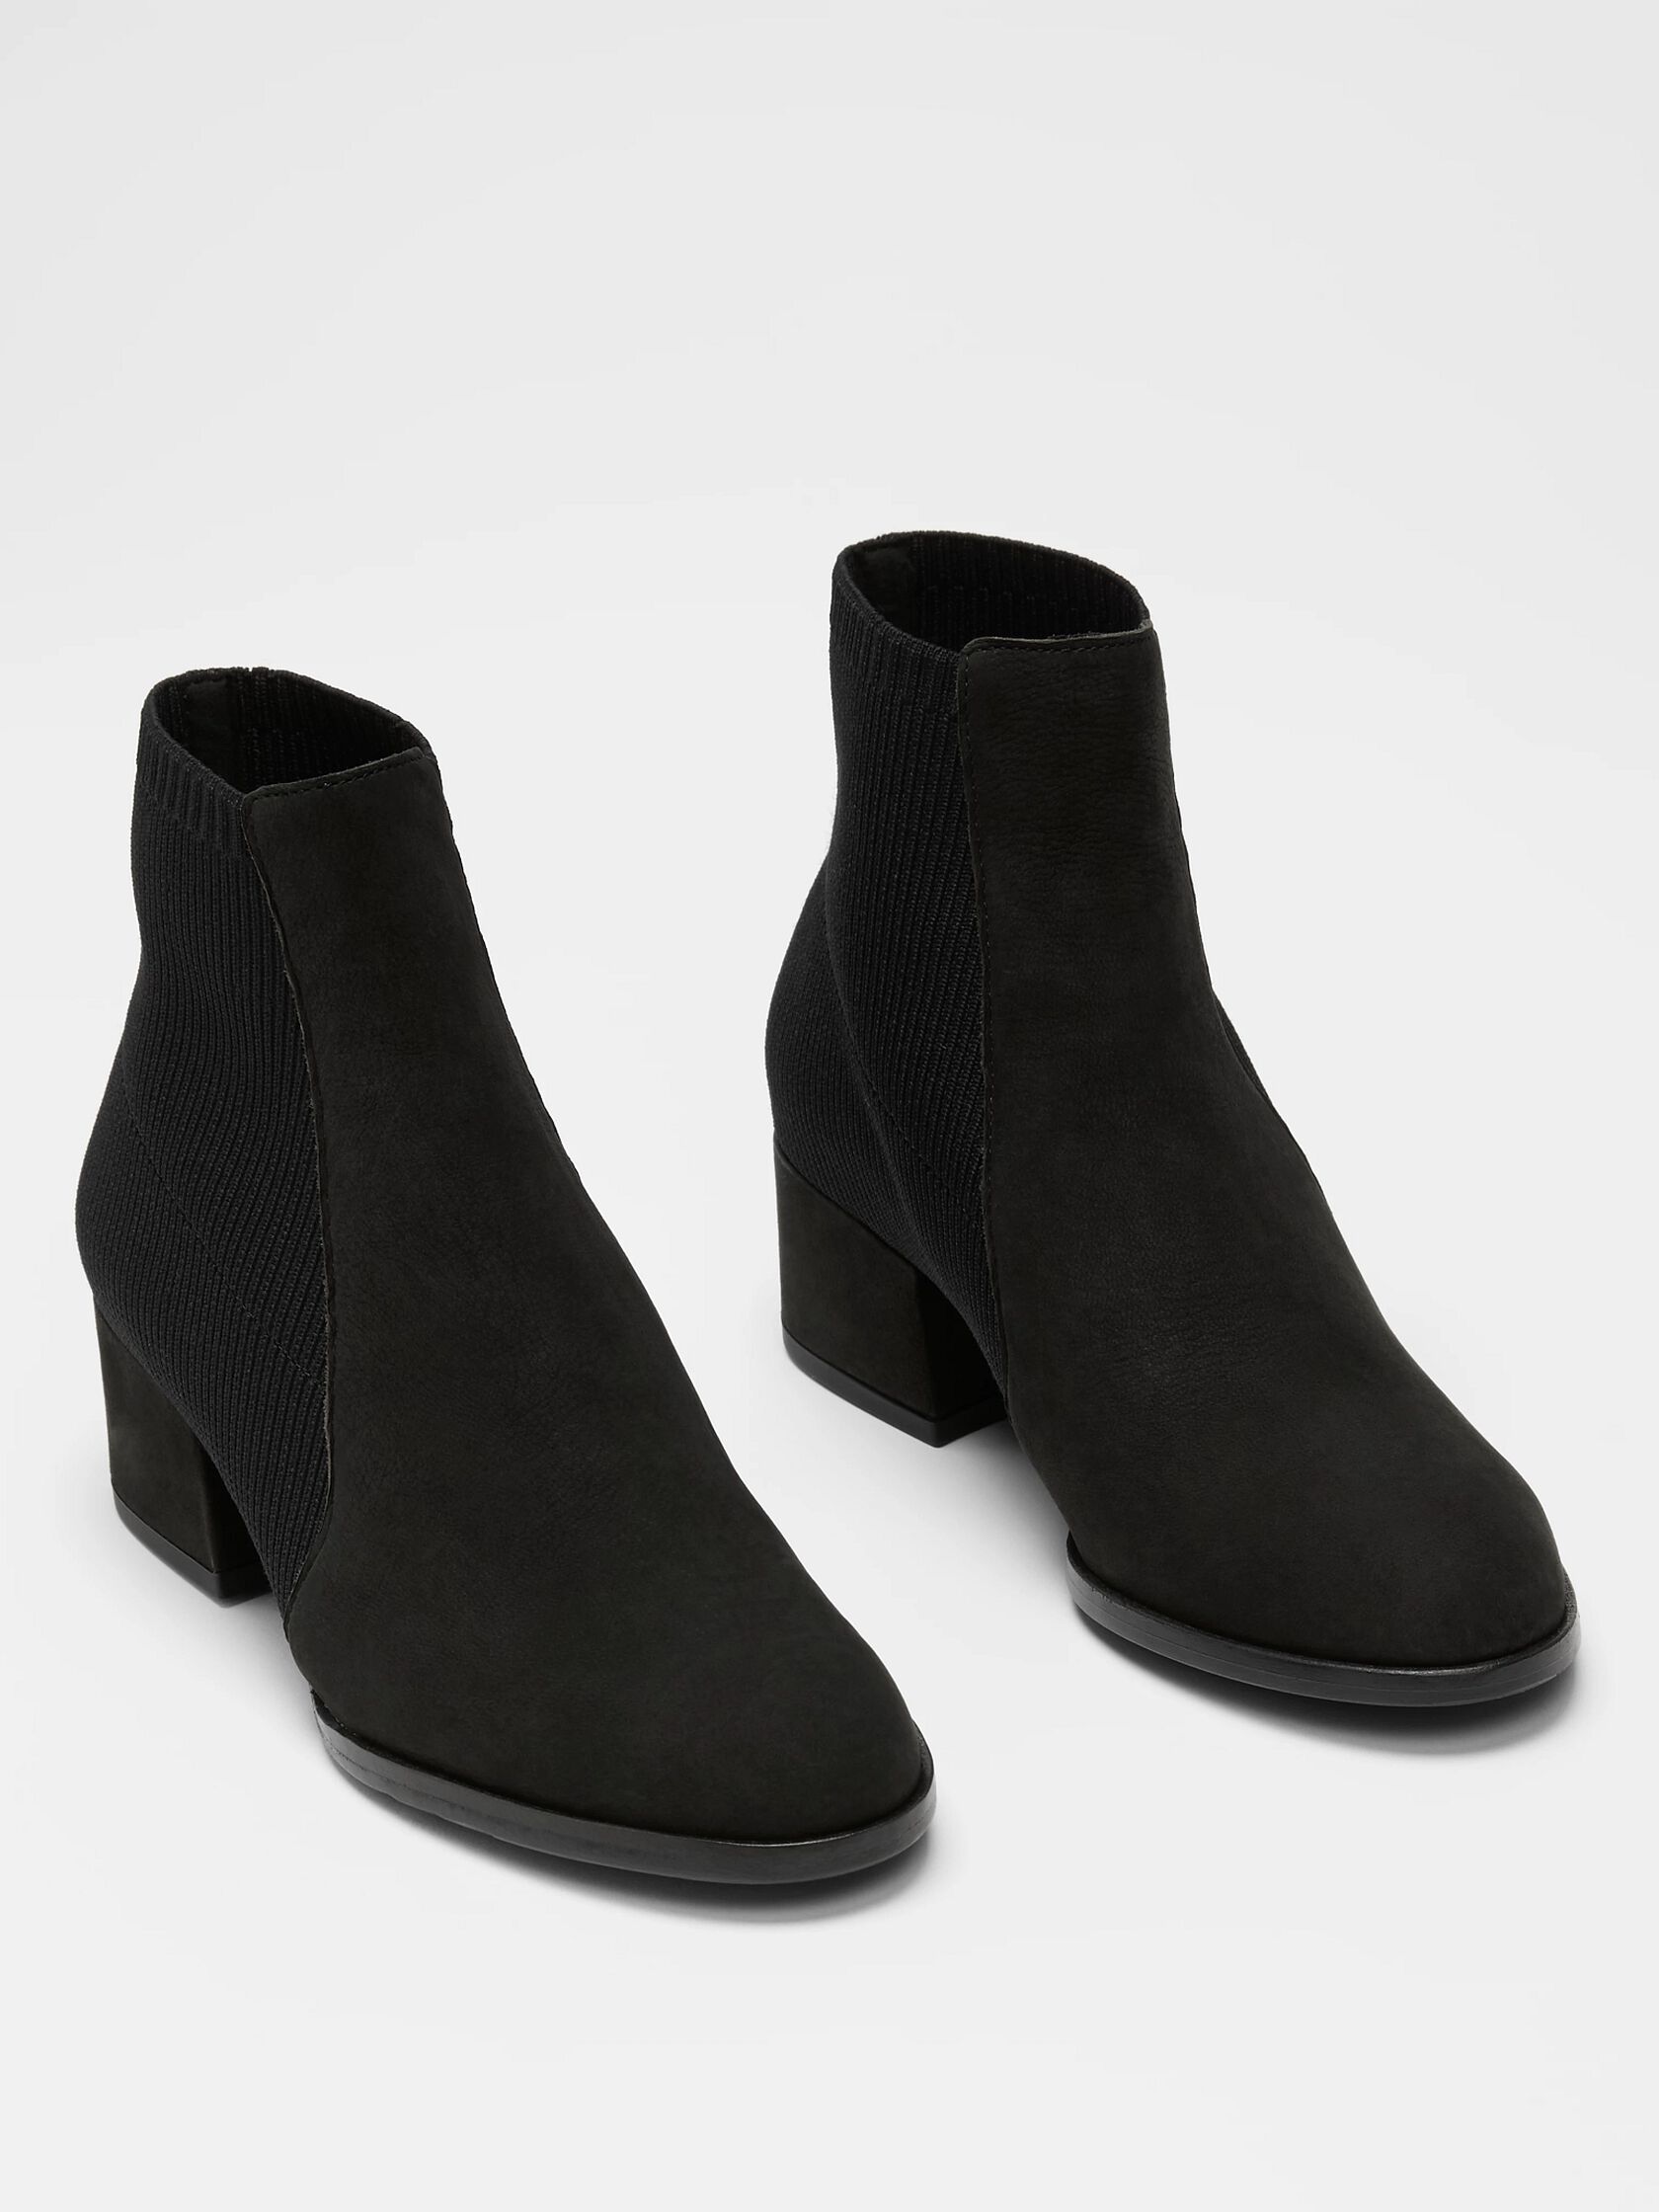 Aesop Tumbled Nubuck and Recycled Stretch Knit Bootie